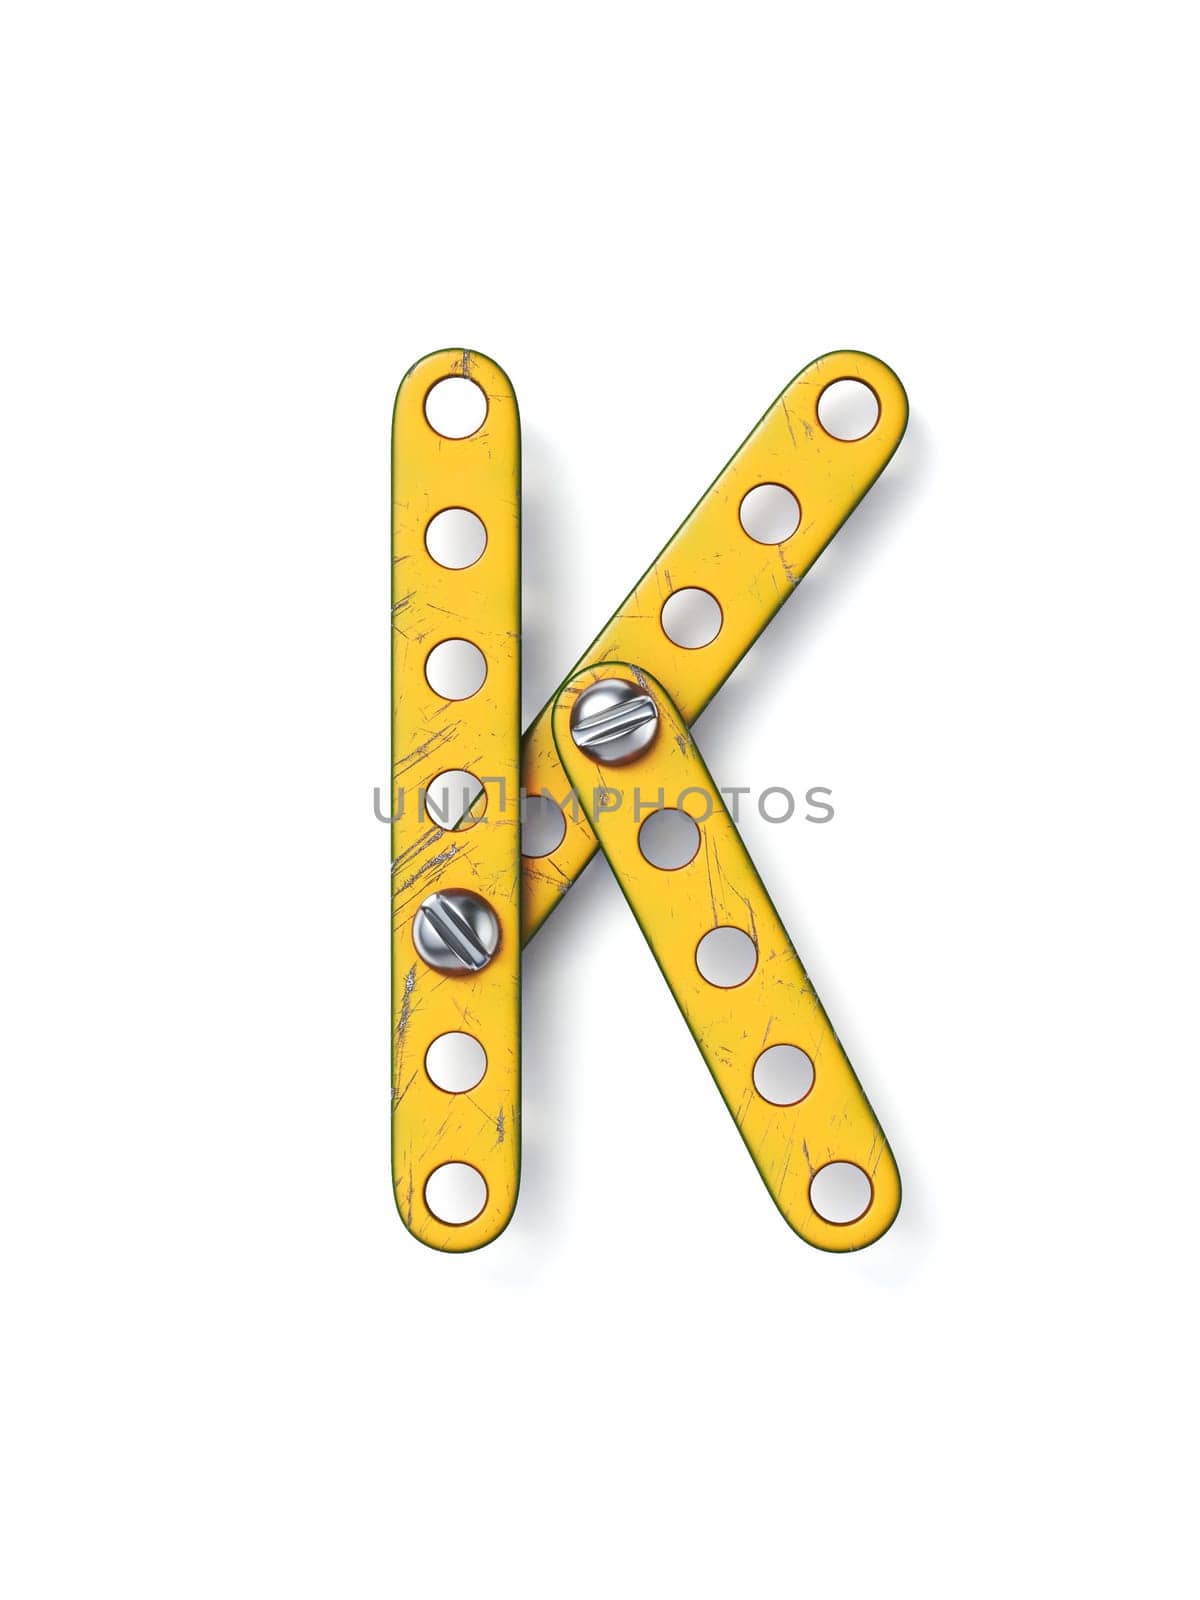 Aged yellow constructor font Letter K 3D rendering illustration isolated on white background